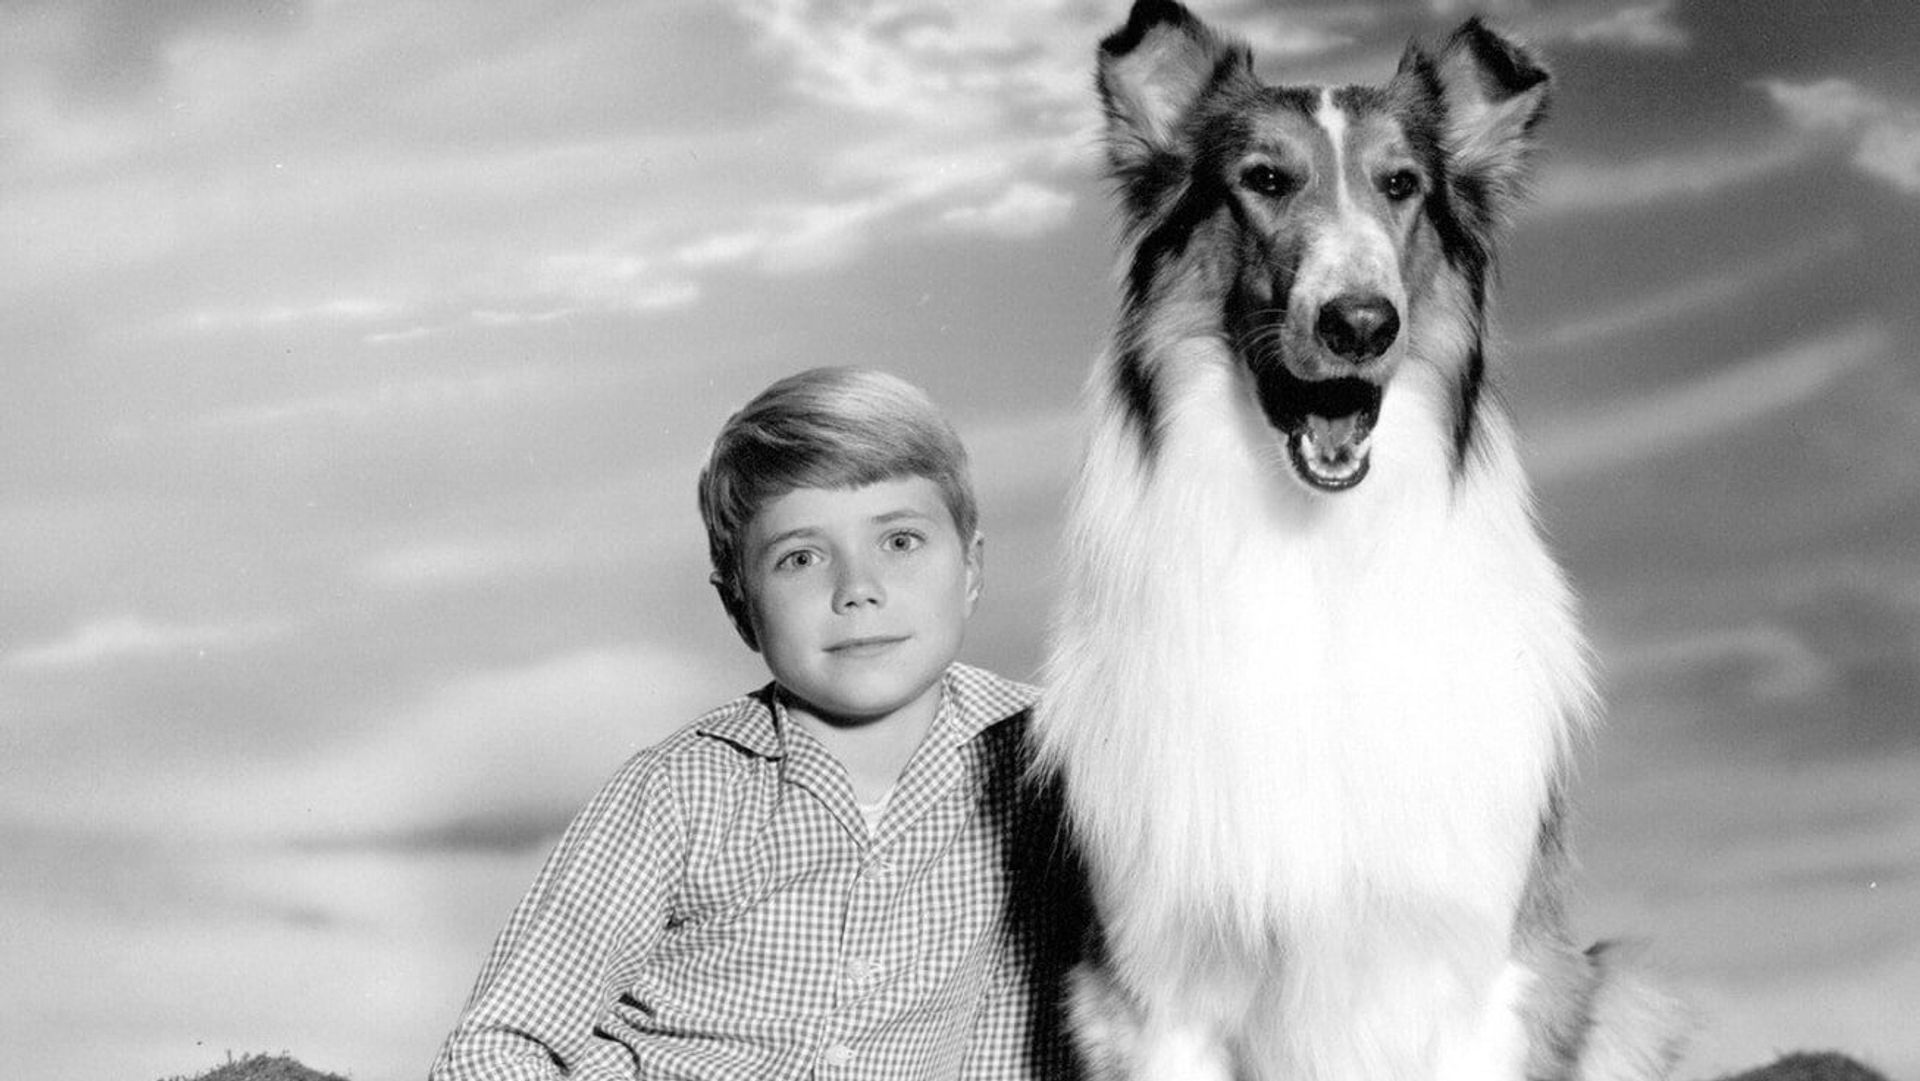 Trailer: Lassie (2020) - the adventure of the most famous dog